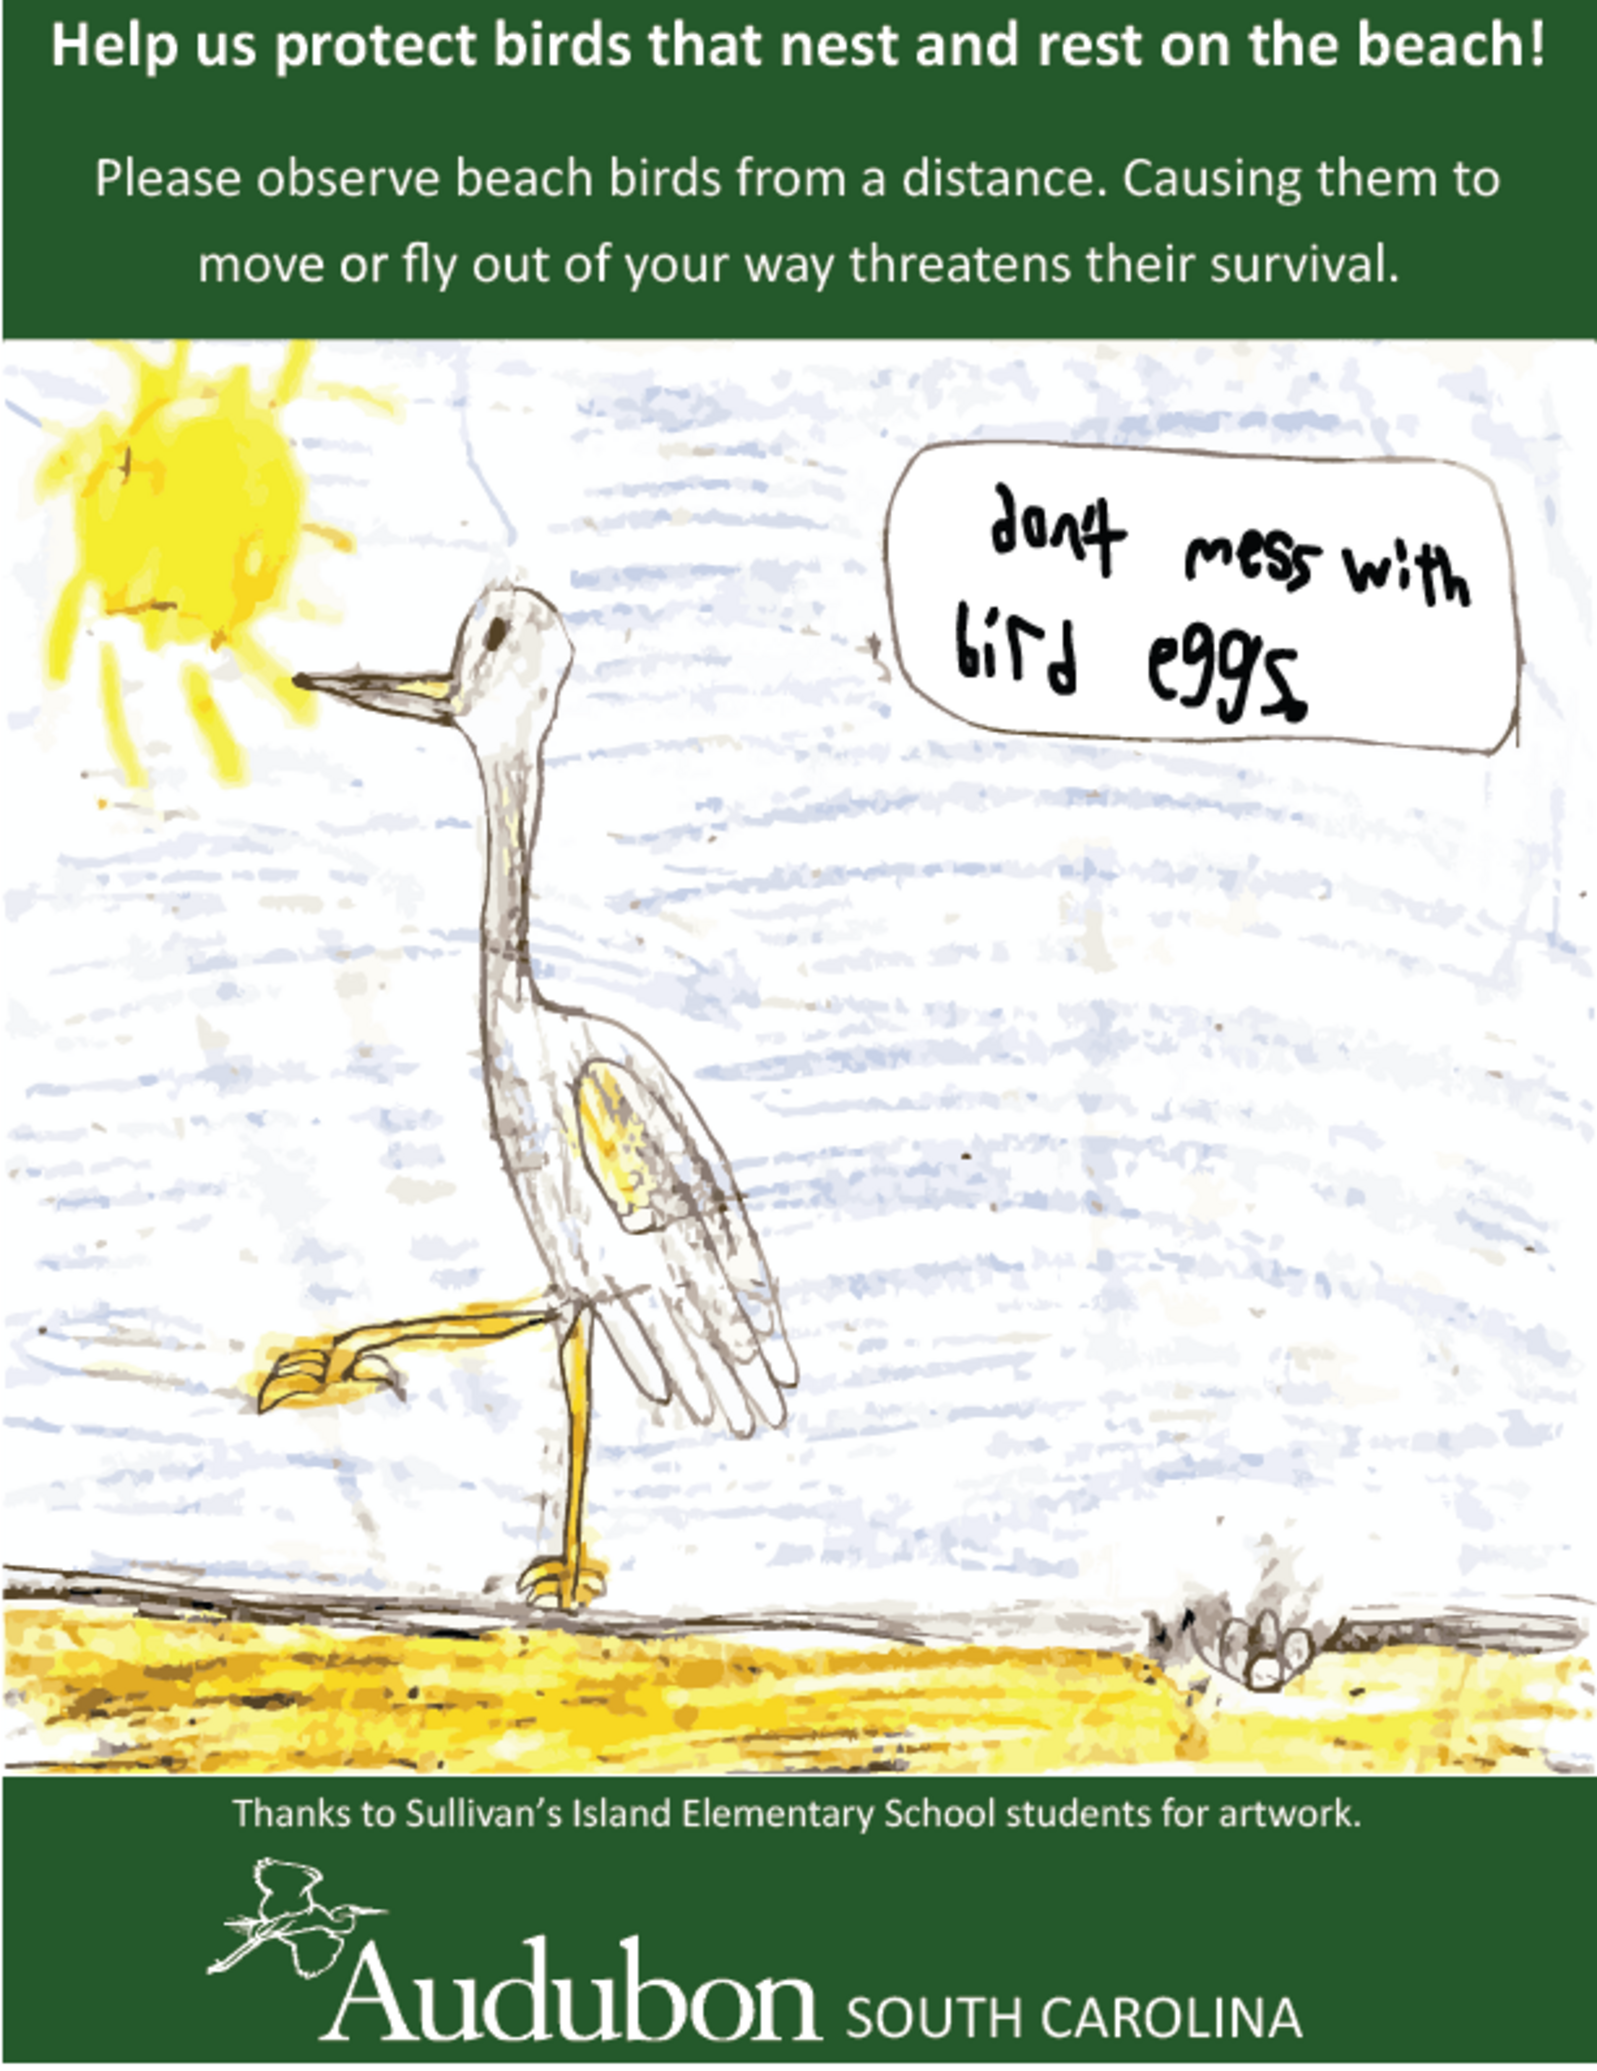 A child's drawing of a bird on a beach with a nest that says "Don't mess with bird eggs"